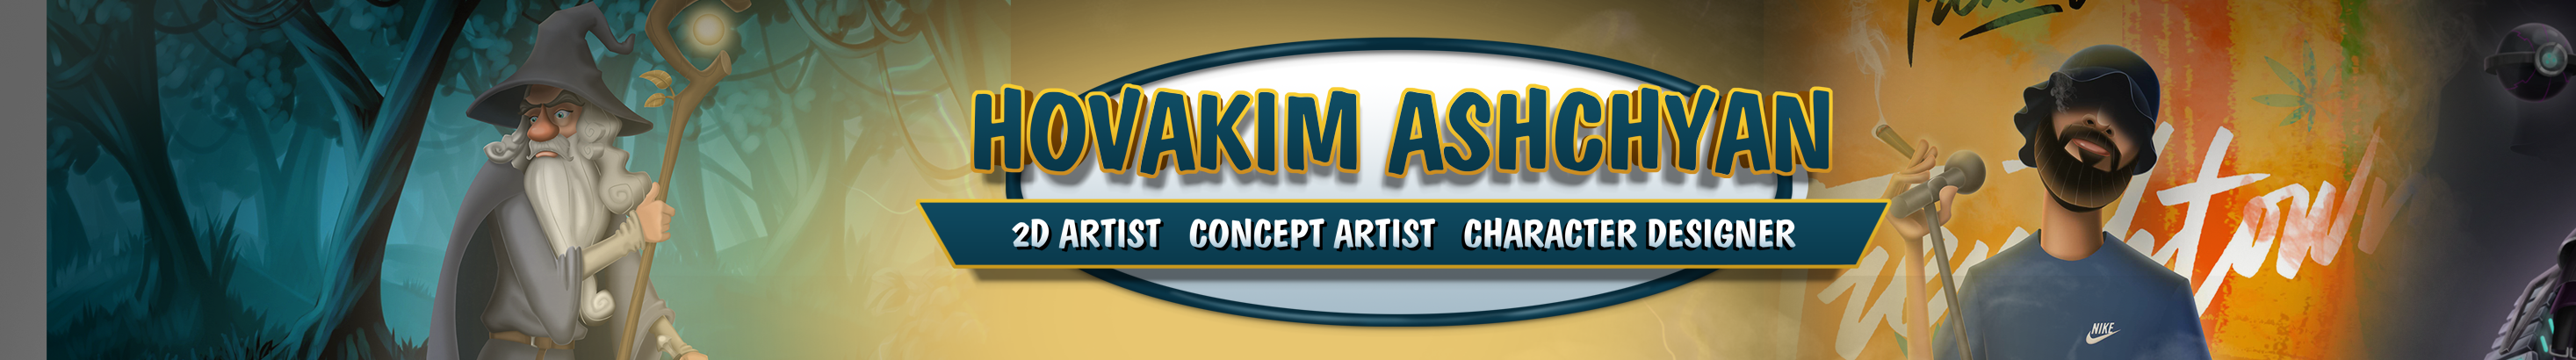 Hovakim Ashchyan's profile banner